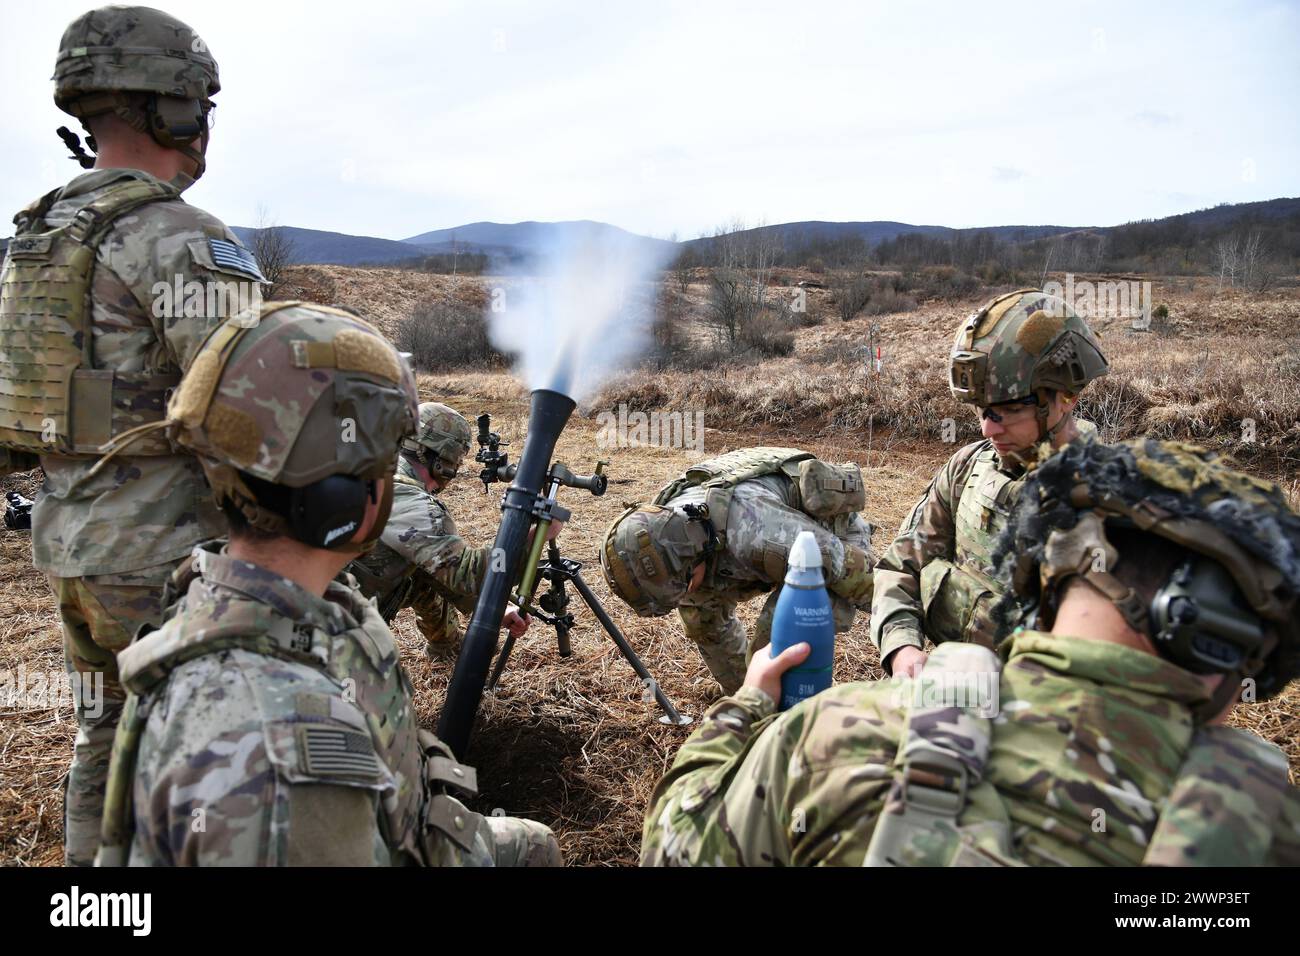 U.S. Army Paratroopers assigned to the 1st Battalion, 503rd Infantry Regiment, 173rd Airborne Brigade fire an M252 81 mm mortar system during Eagle Ursa exercise at the training range in Slunj, Croatia, Feb. 24, 2024. The 173rd Airborne Brigade is the U.S. Army's Contingency Response Force in Europe, providing rapidly deployable forces to the United States European, African, and Central Command areas of responsibility. Forward deployed across Italy and Germany, the brigade routinely trains alongside NATO allies and partners to build partnerships and strengthen the alliance.  Army Stock Photo